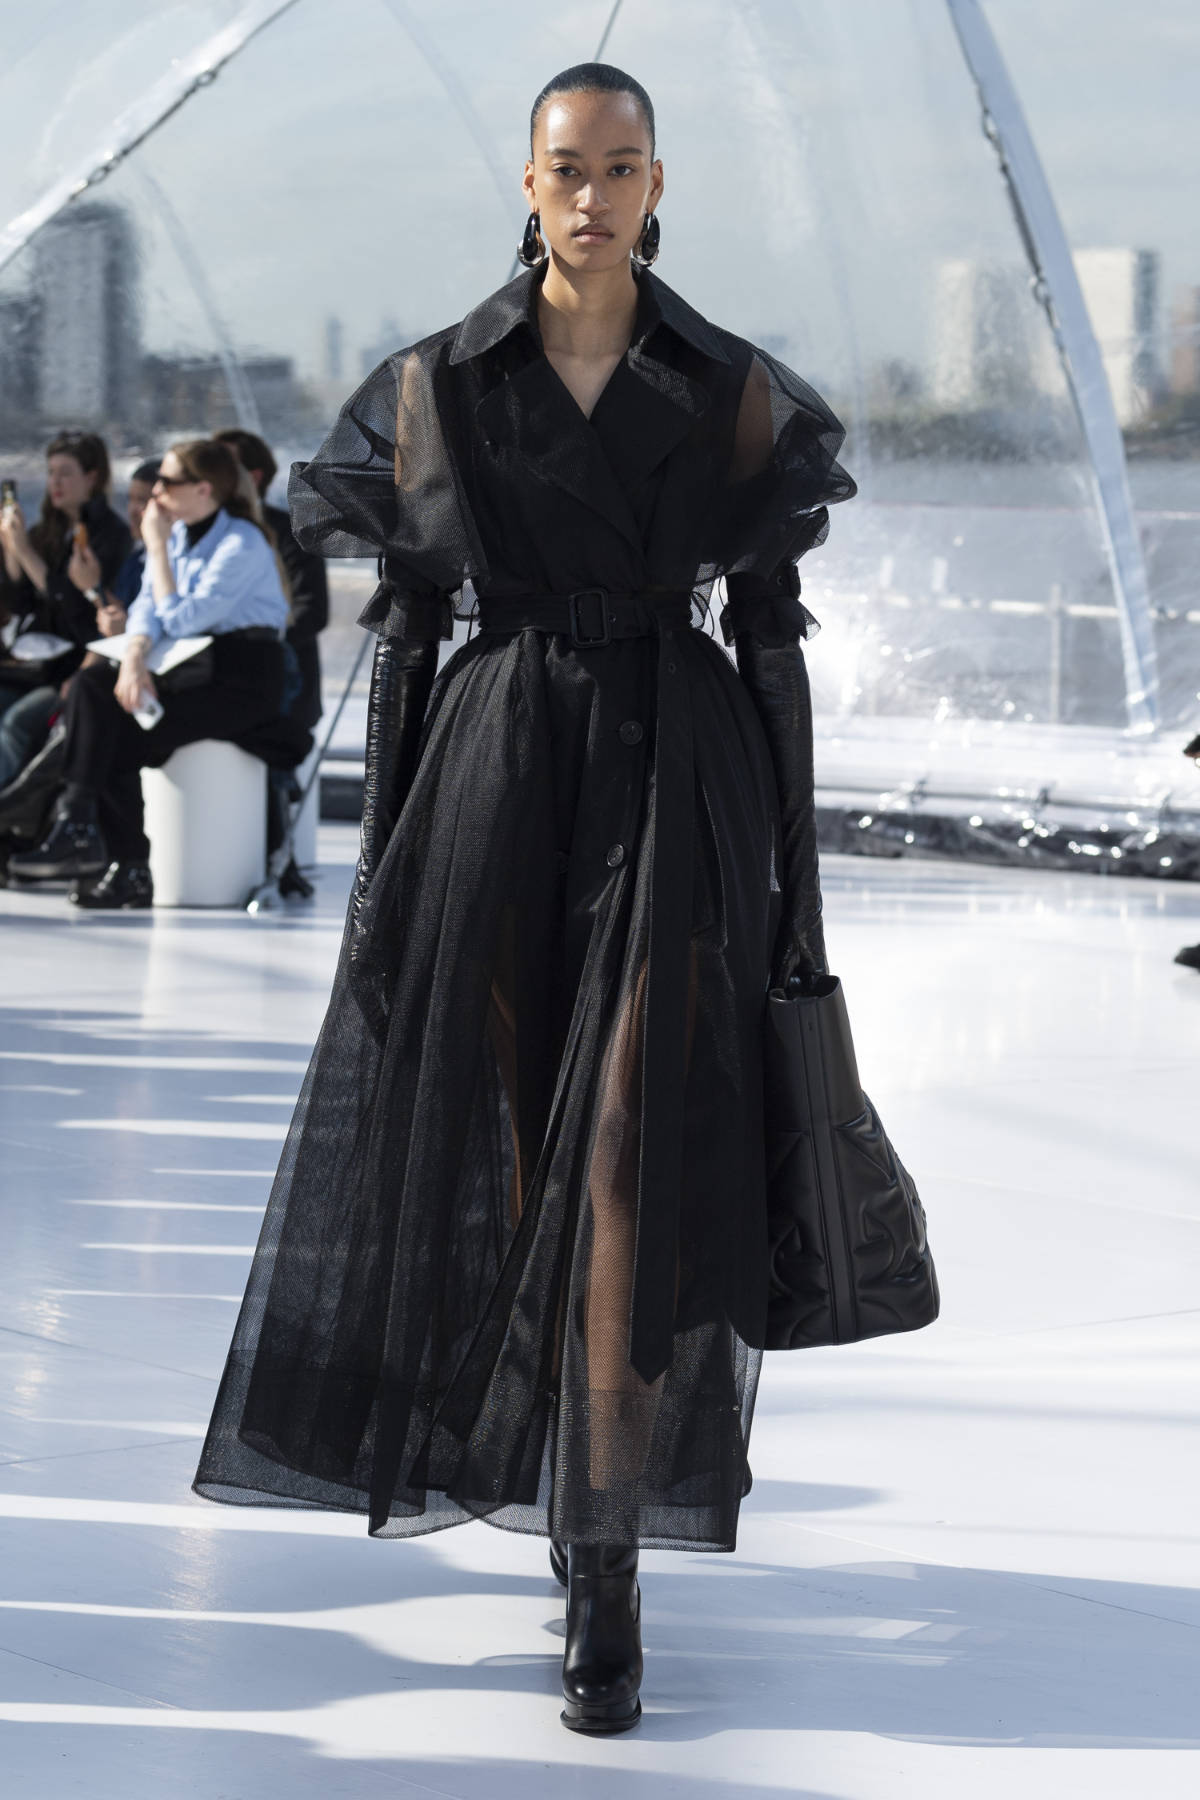 Alexander McQueen Presents Its New Spring Summer 2023 Womenswear Collection: First Sight